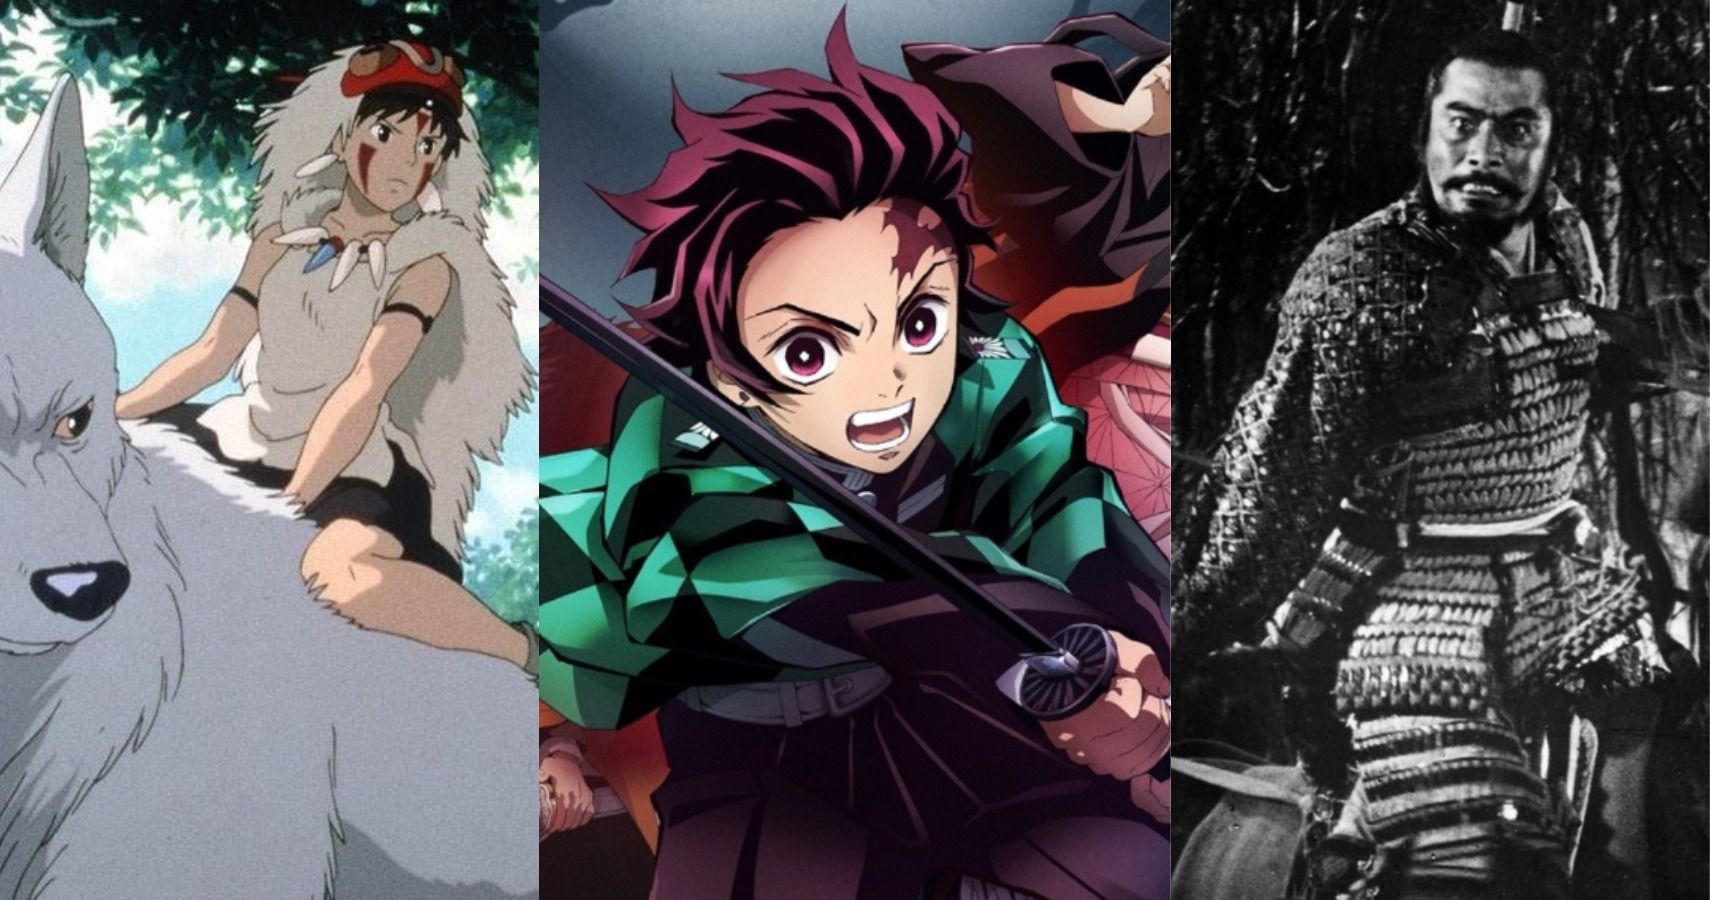 Demon Slayer: 10 Classic Japanese Films You Need To Watch If You Enjoy